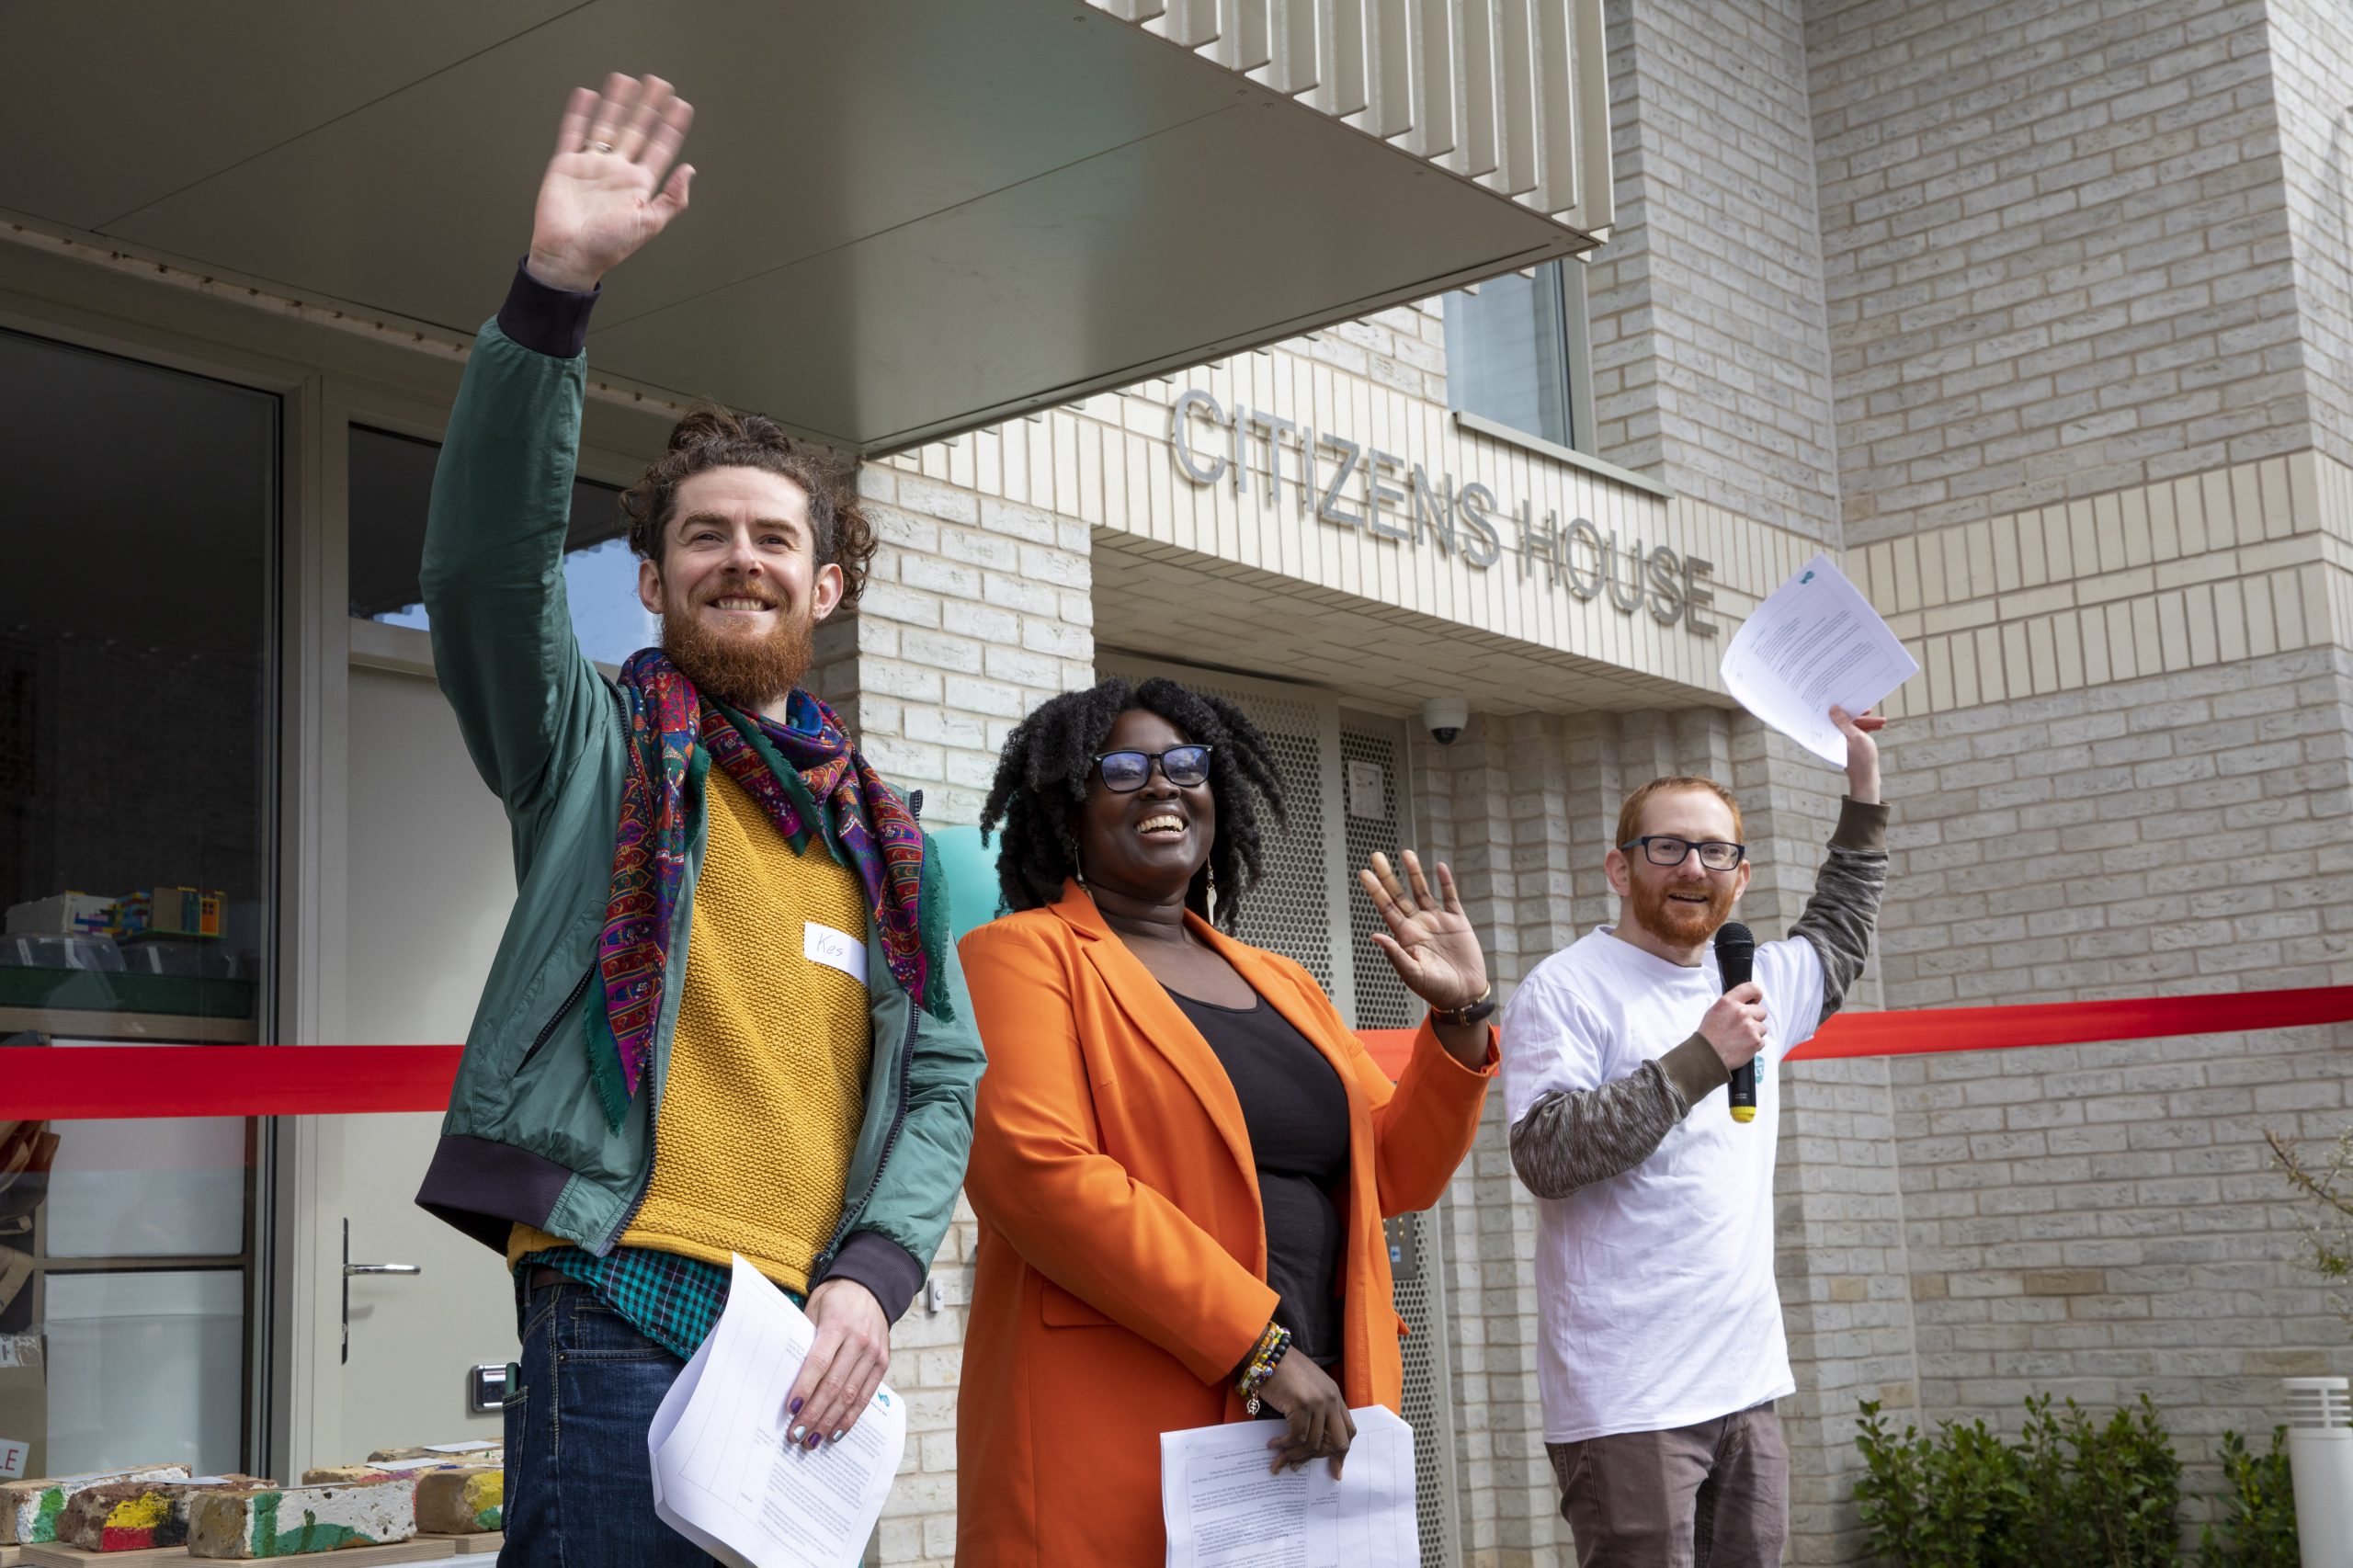 Credit: Yiannis Katsaris Image of 3 people waving at London CLT's Citizen's House opening